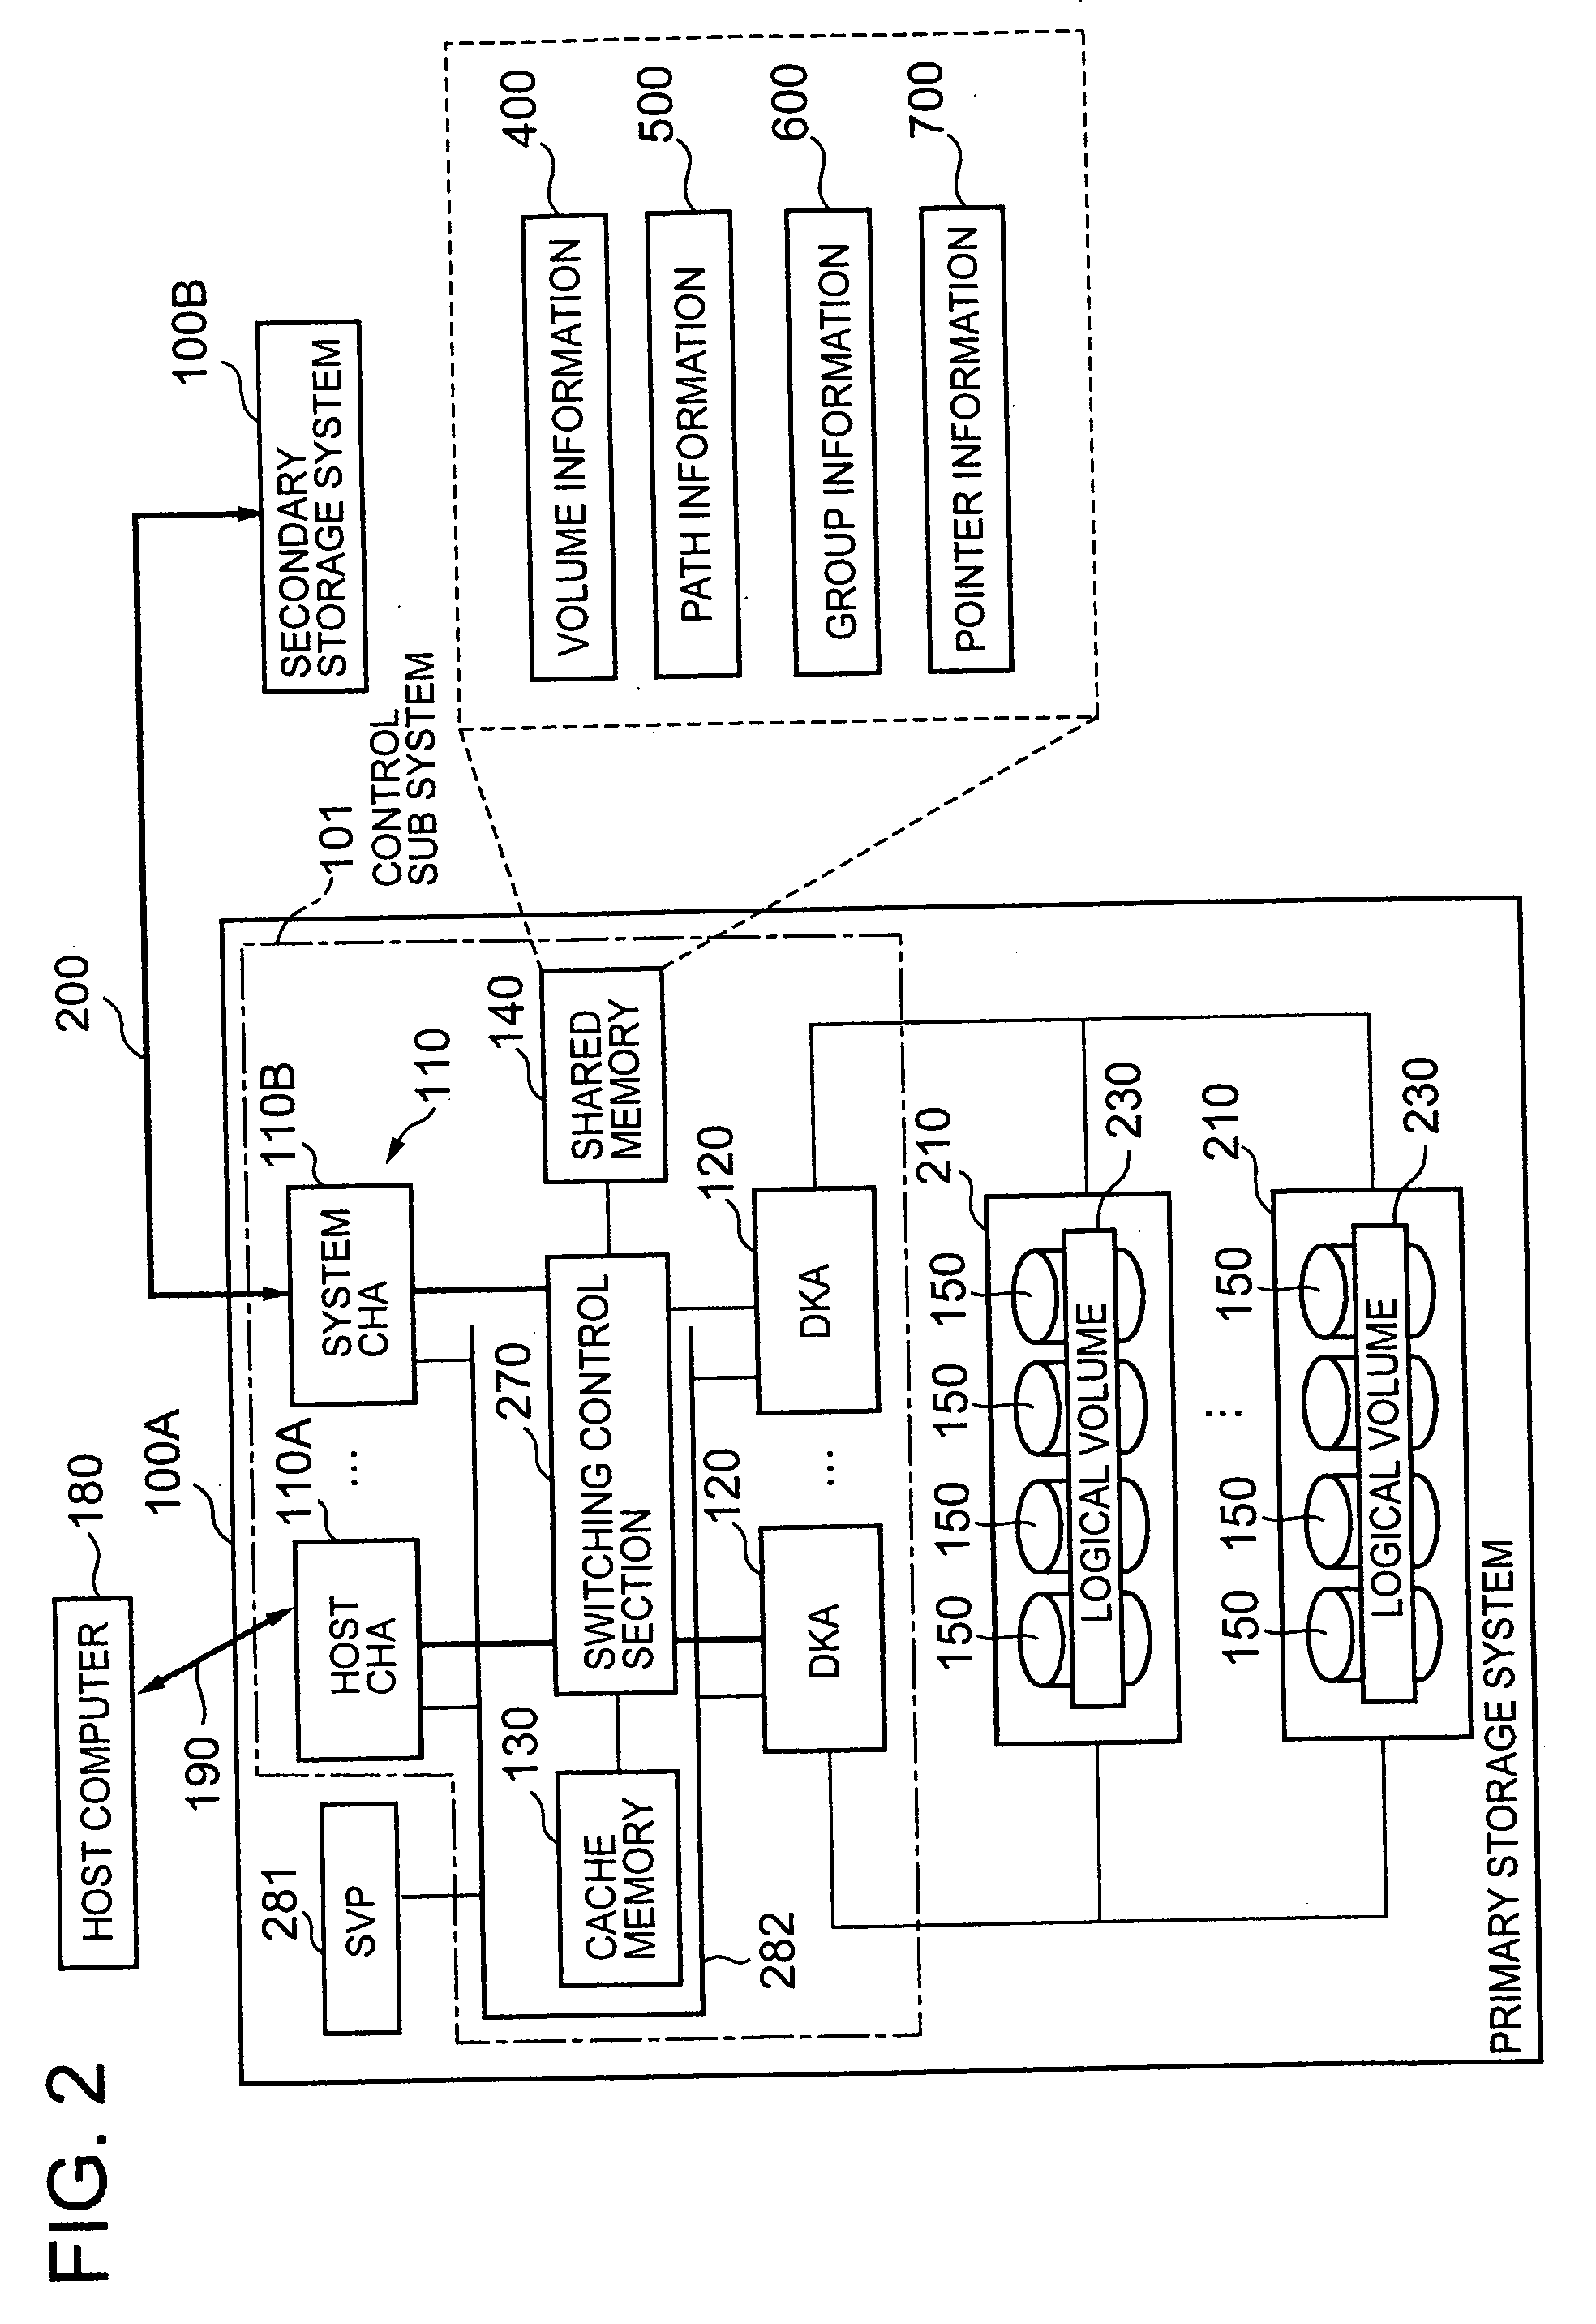 Storage system and data processing system